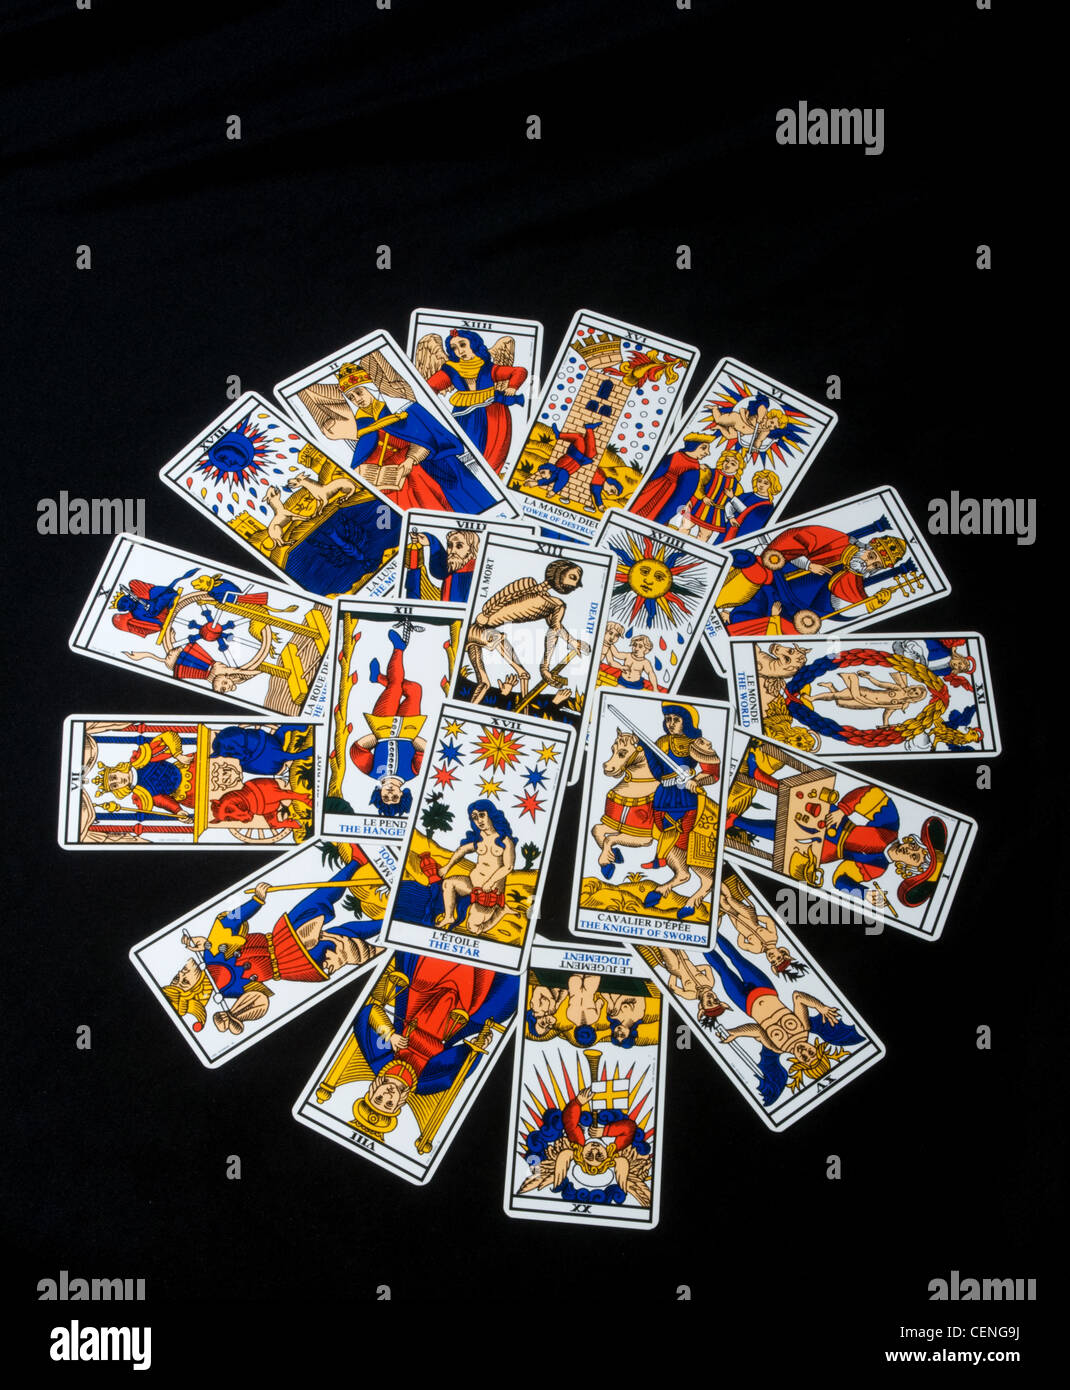 Tarot cards layed out in a sun shaped tarot spread Stock Photo